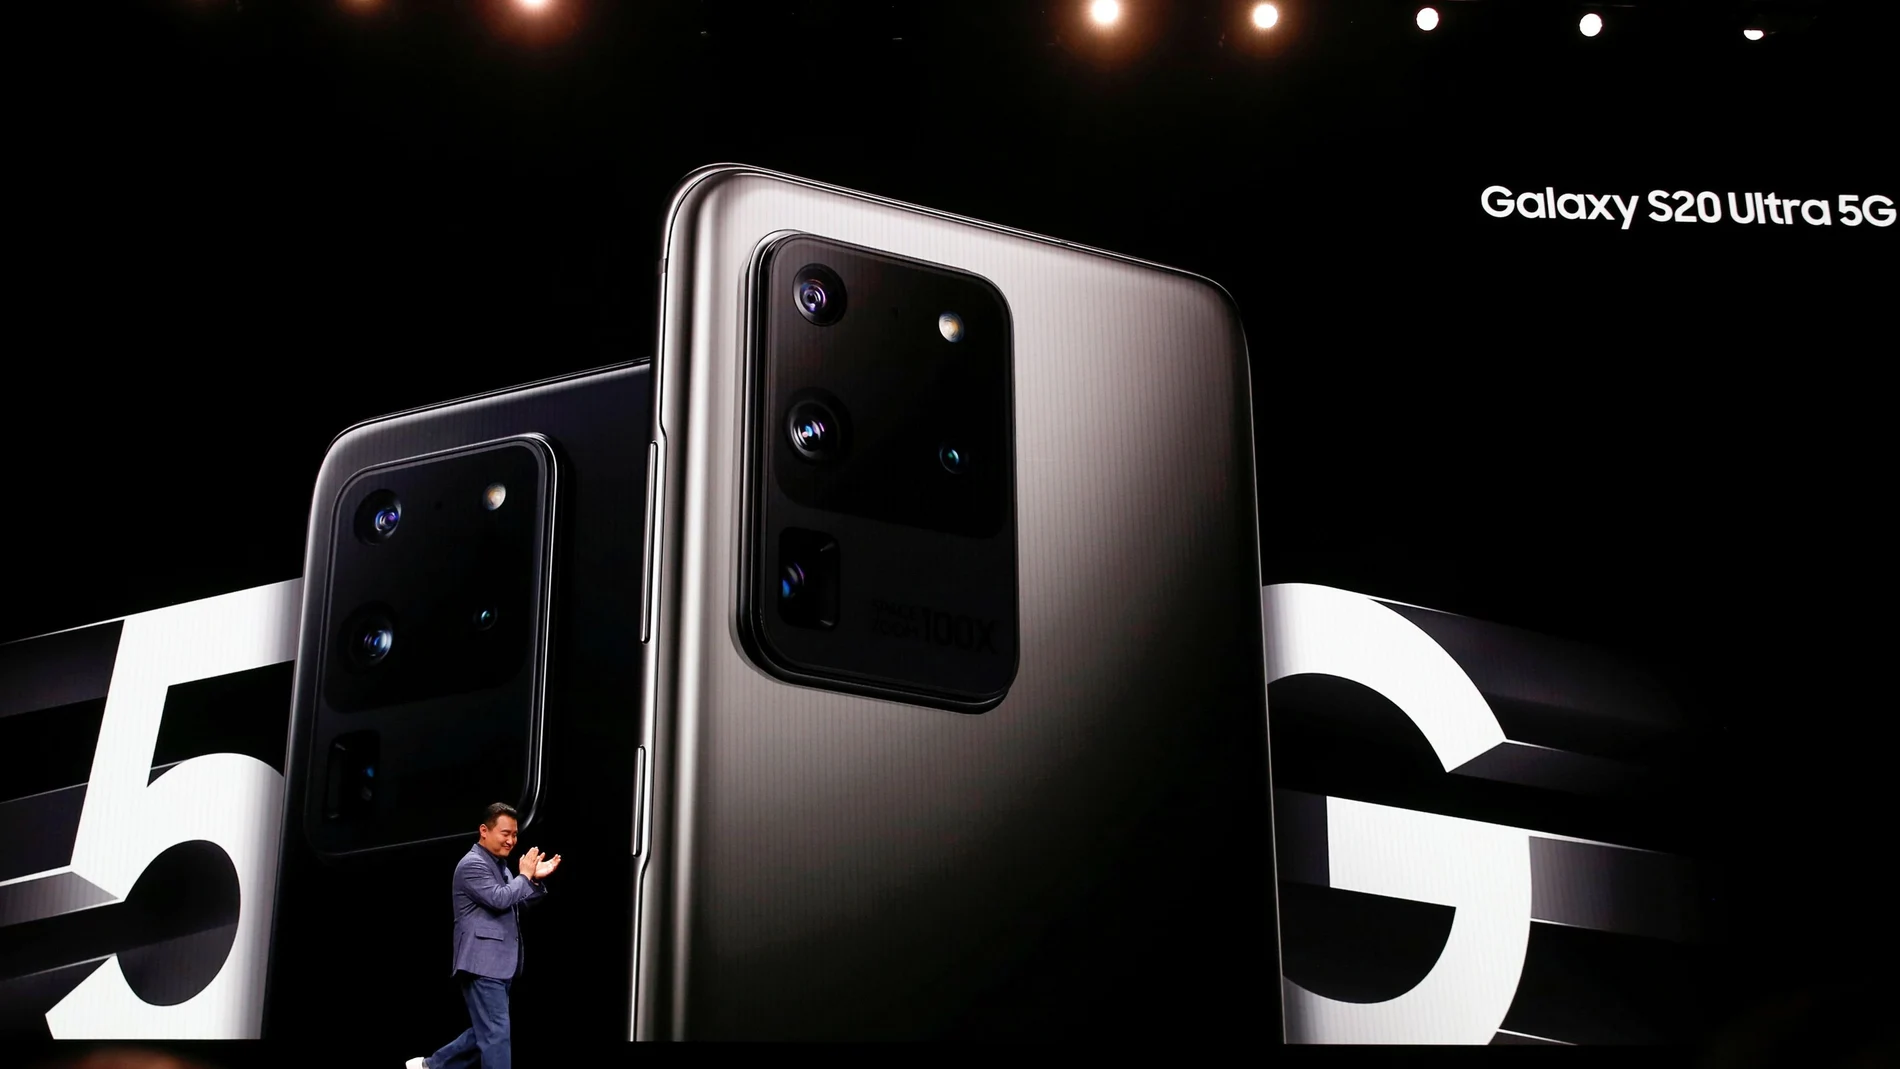 FILE PHOTO: TM Roh of Samsung Electronics unveils the Galaxy S20 Ultra 5G smartphone during Samsung Galaxy Unpacked 2020 in San Francisco